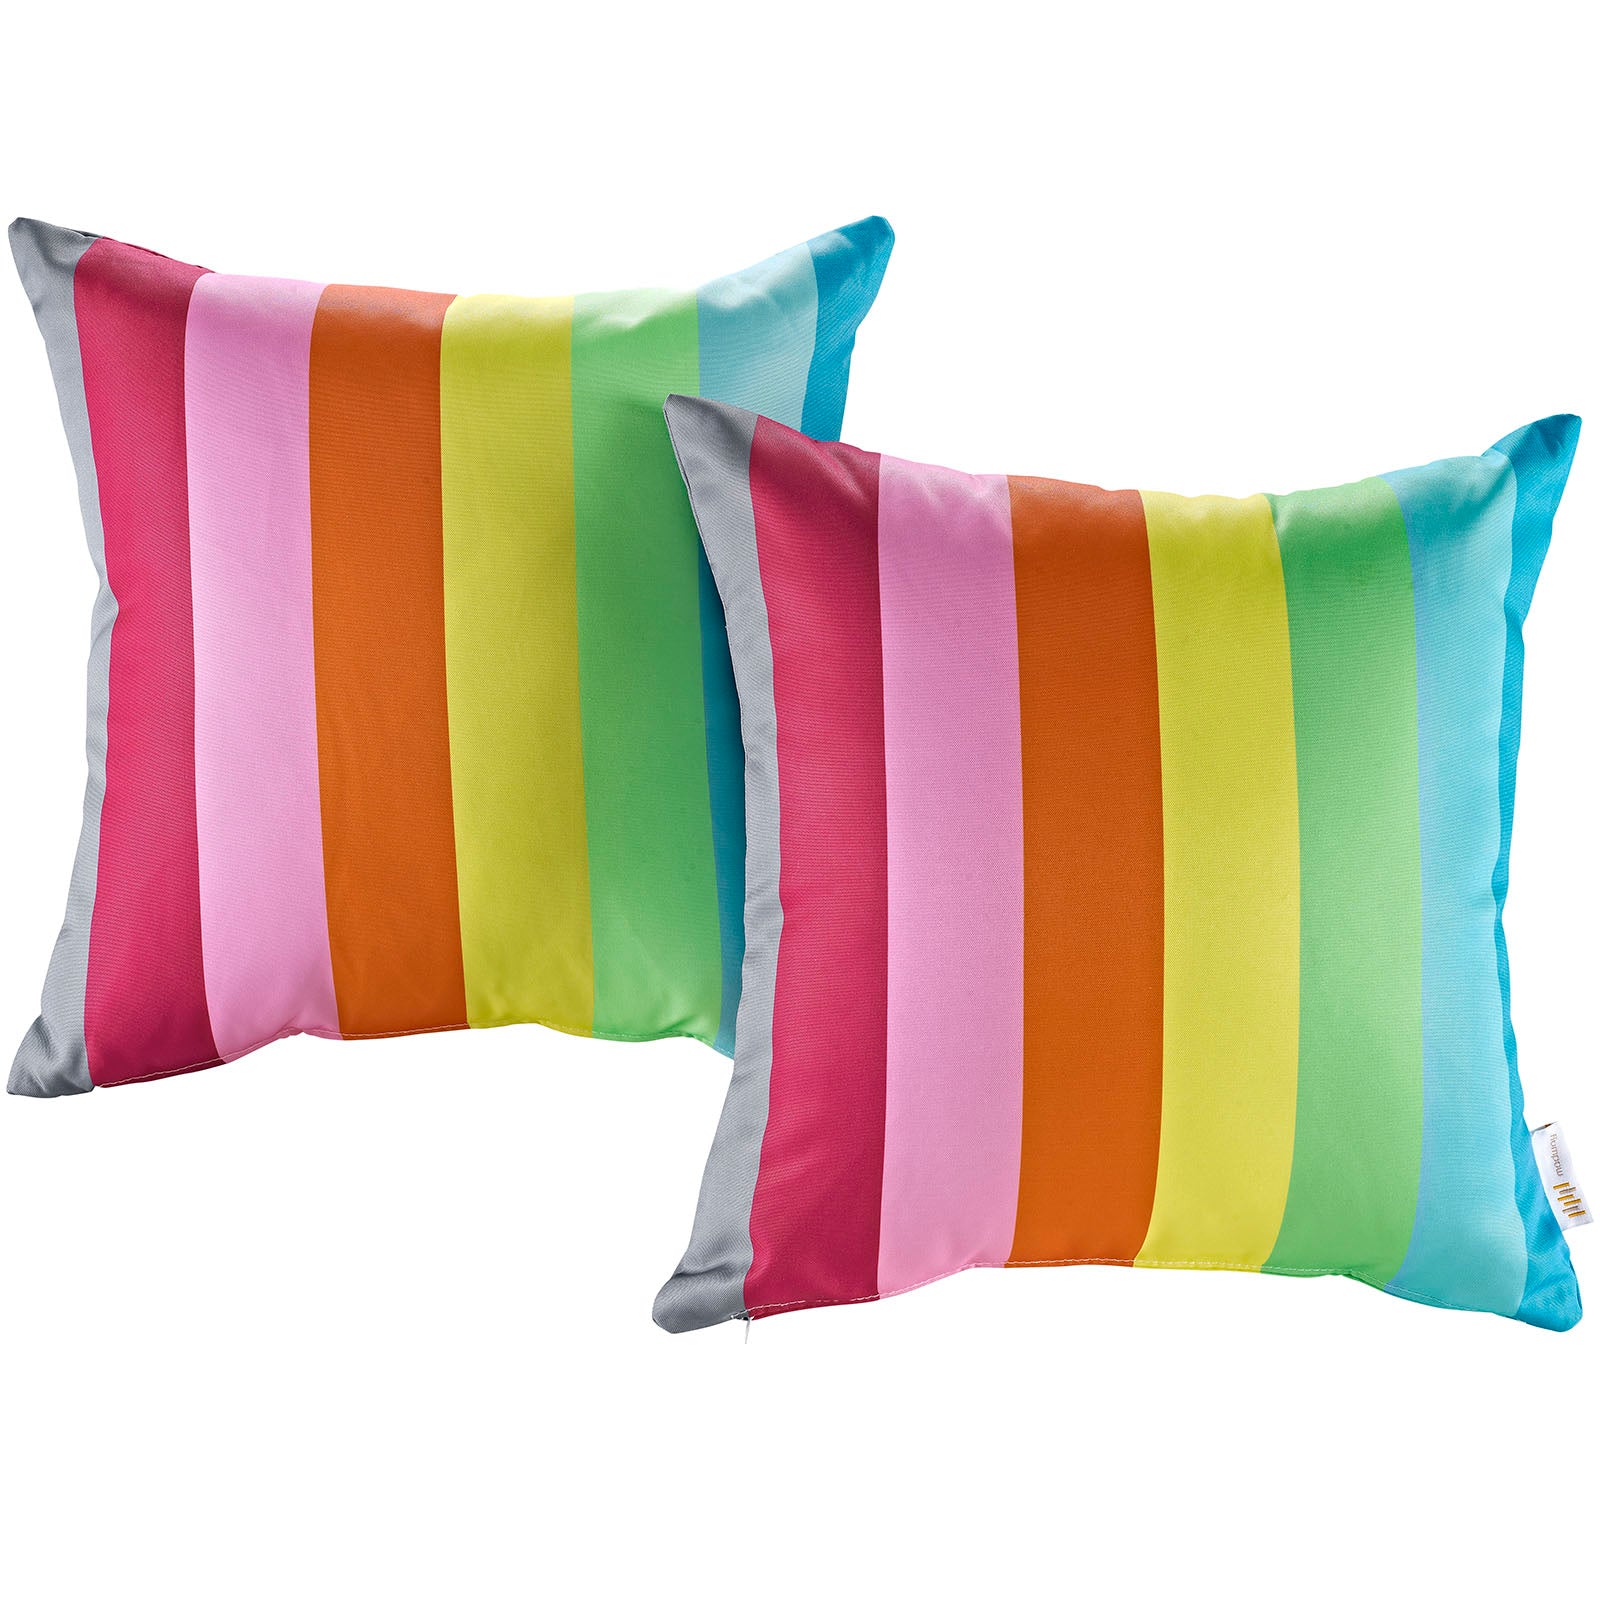 Modway Outdoor Pillows & Cushions - Modway Two Piece Outdoor Patio Pillow Set Rainbow